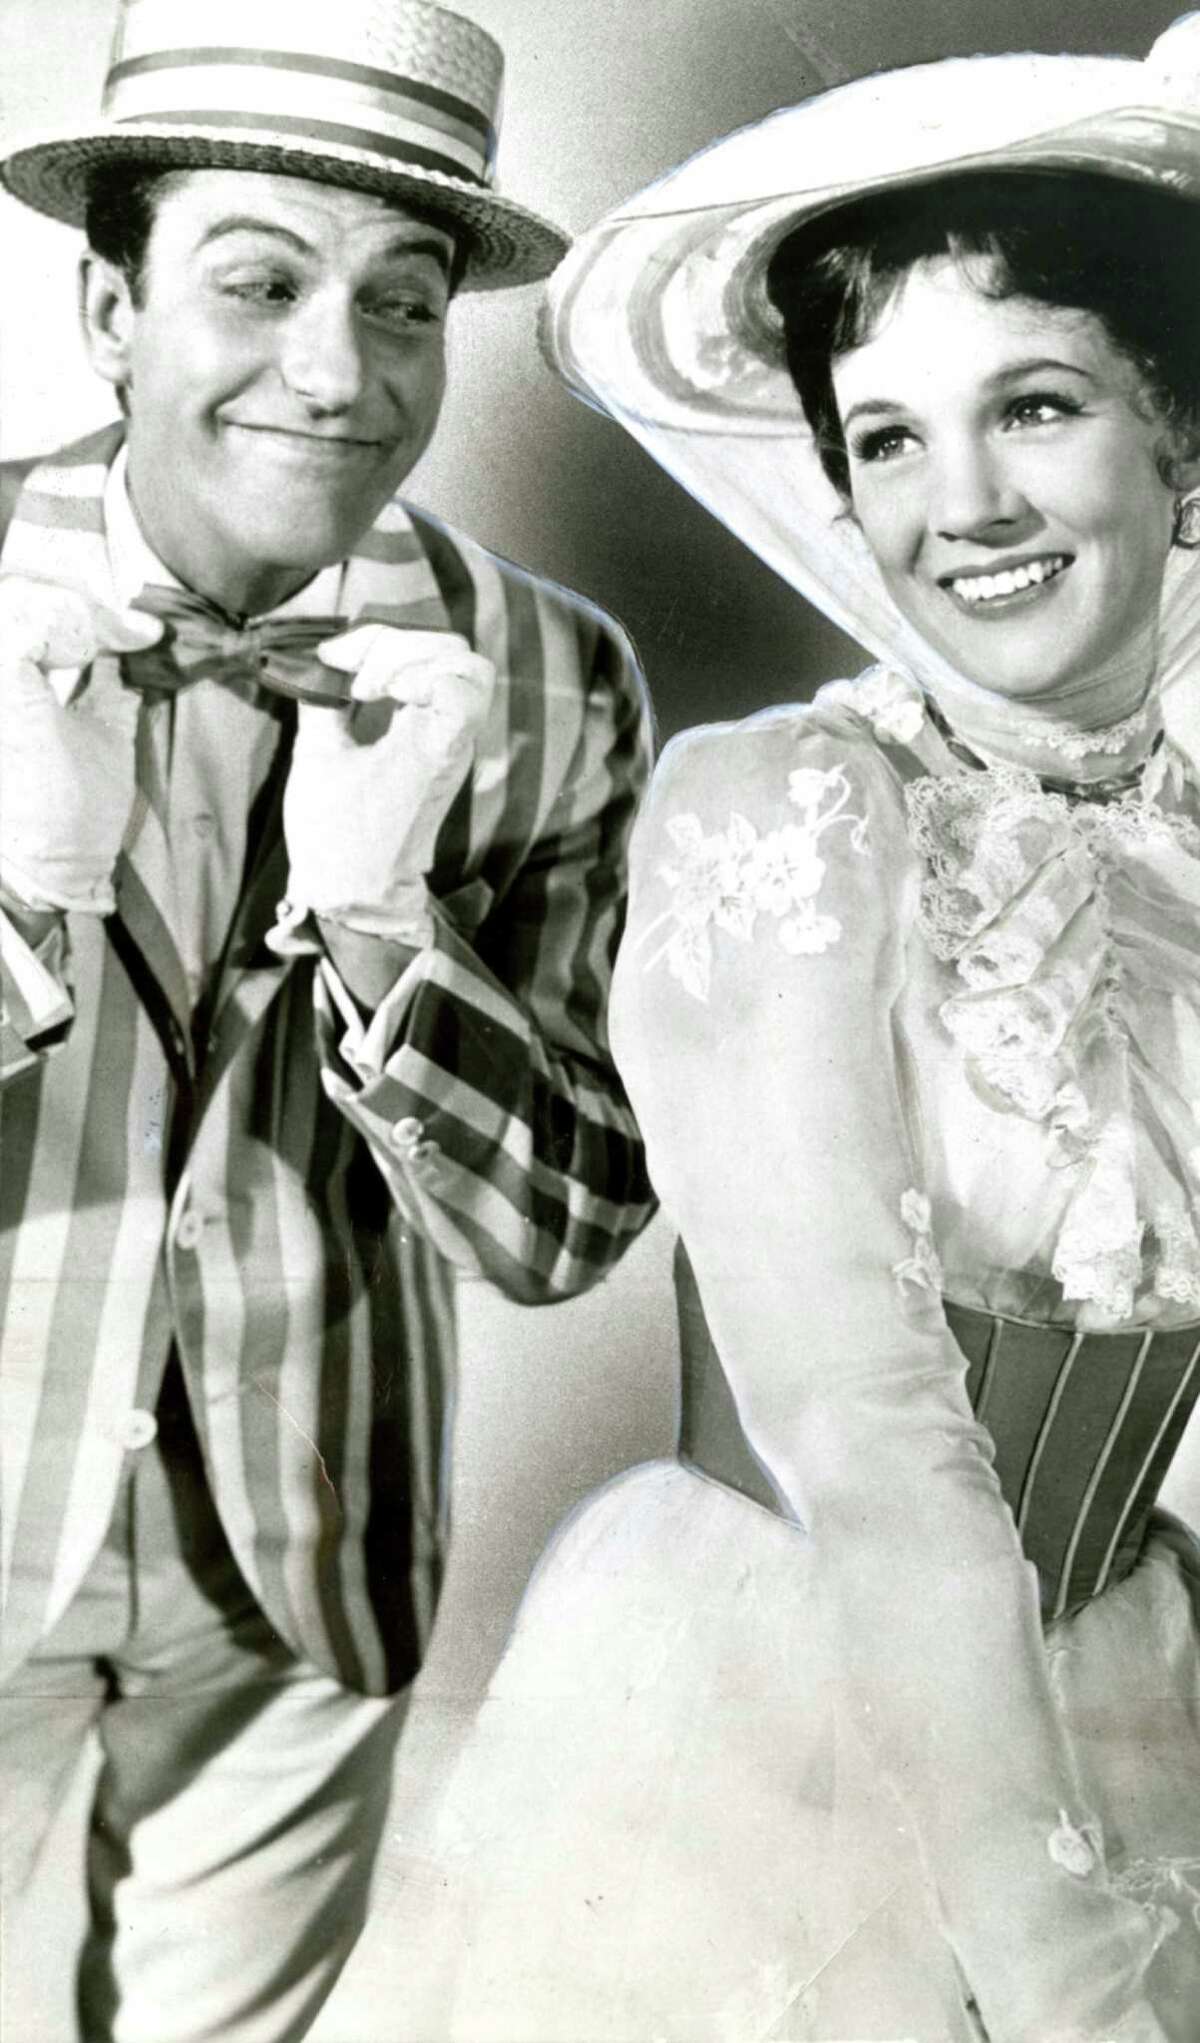 Laughter - like the kind Dick Van Dyke and Julie Andrews mined in "Mary Poppins" - can be a great motivator when it comes to exercise.